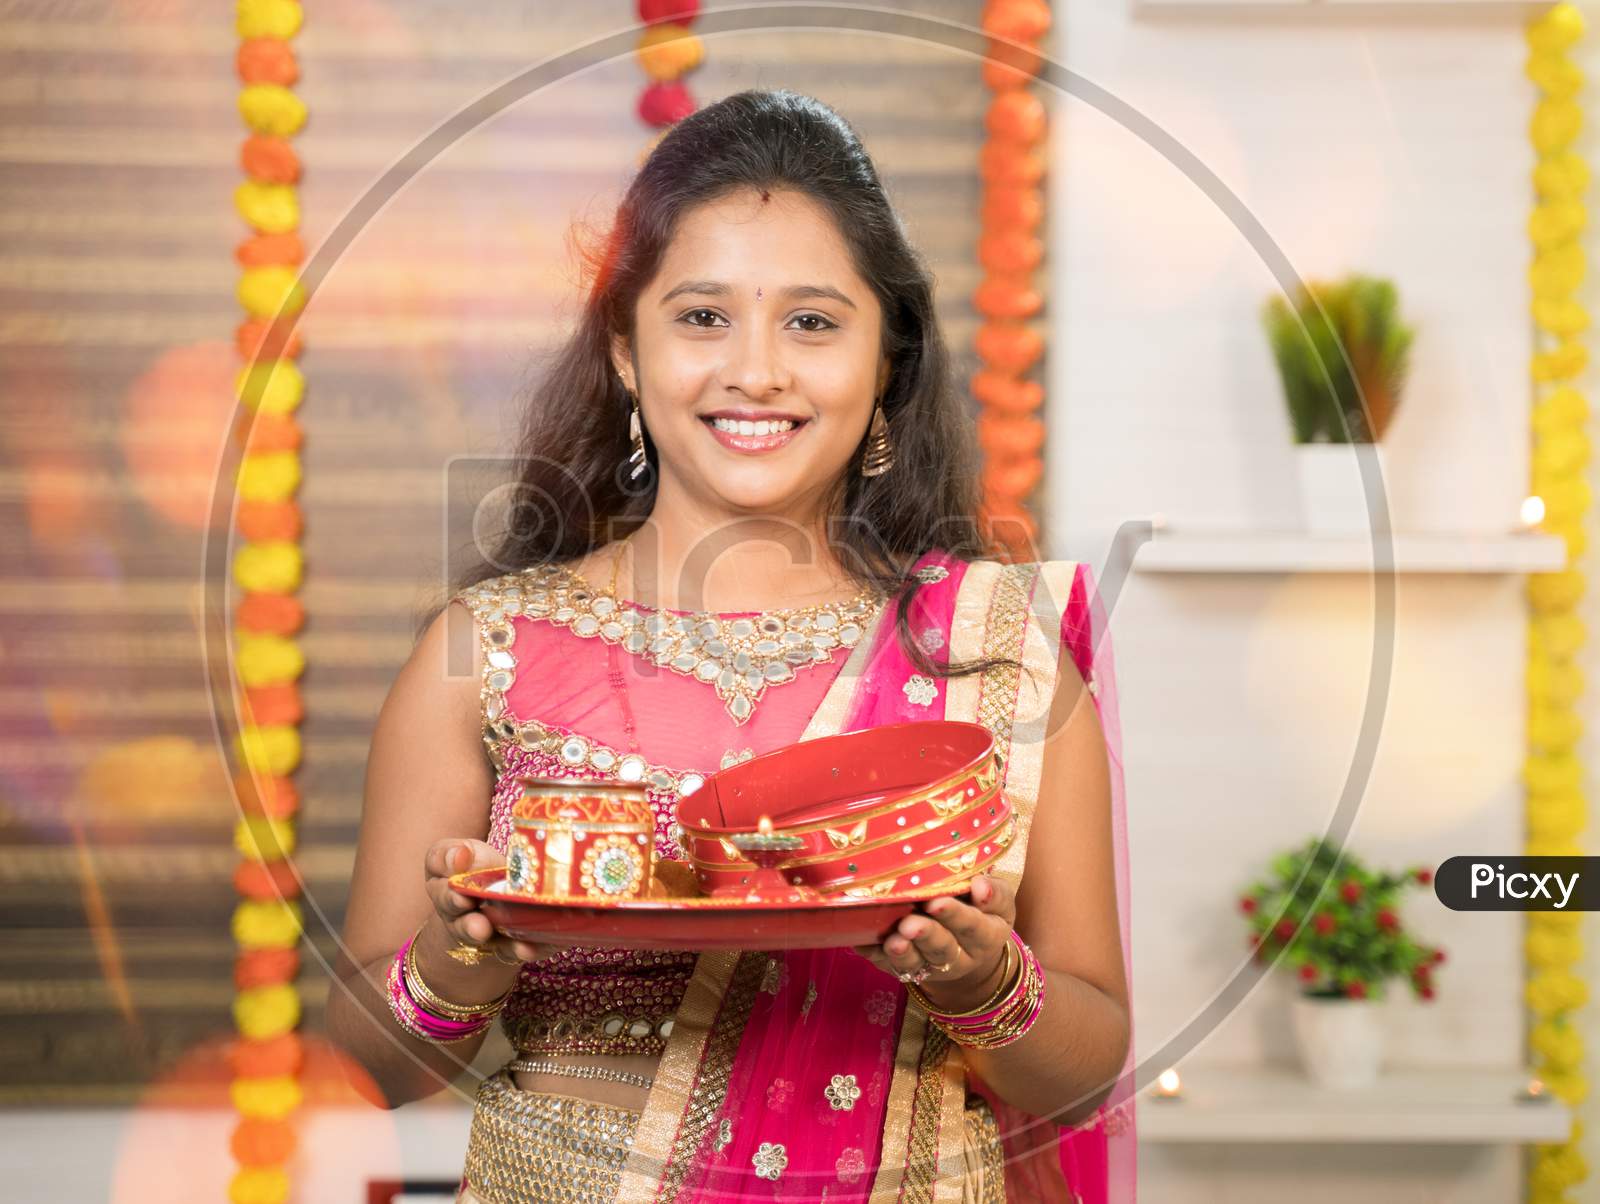 Portrit Shot Of Indian Married Woman In Traditional Dress Holding Karva Chauth Thali Or Plate During Hindu Indian Religious Karwa Chauth Festival.